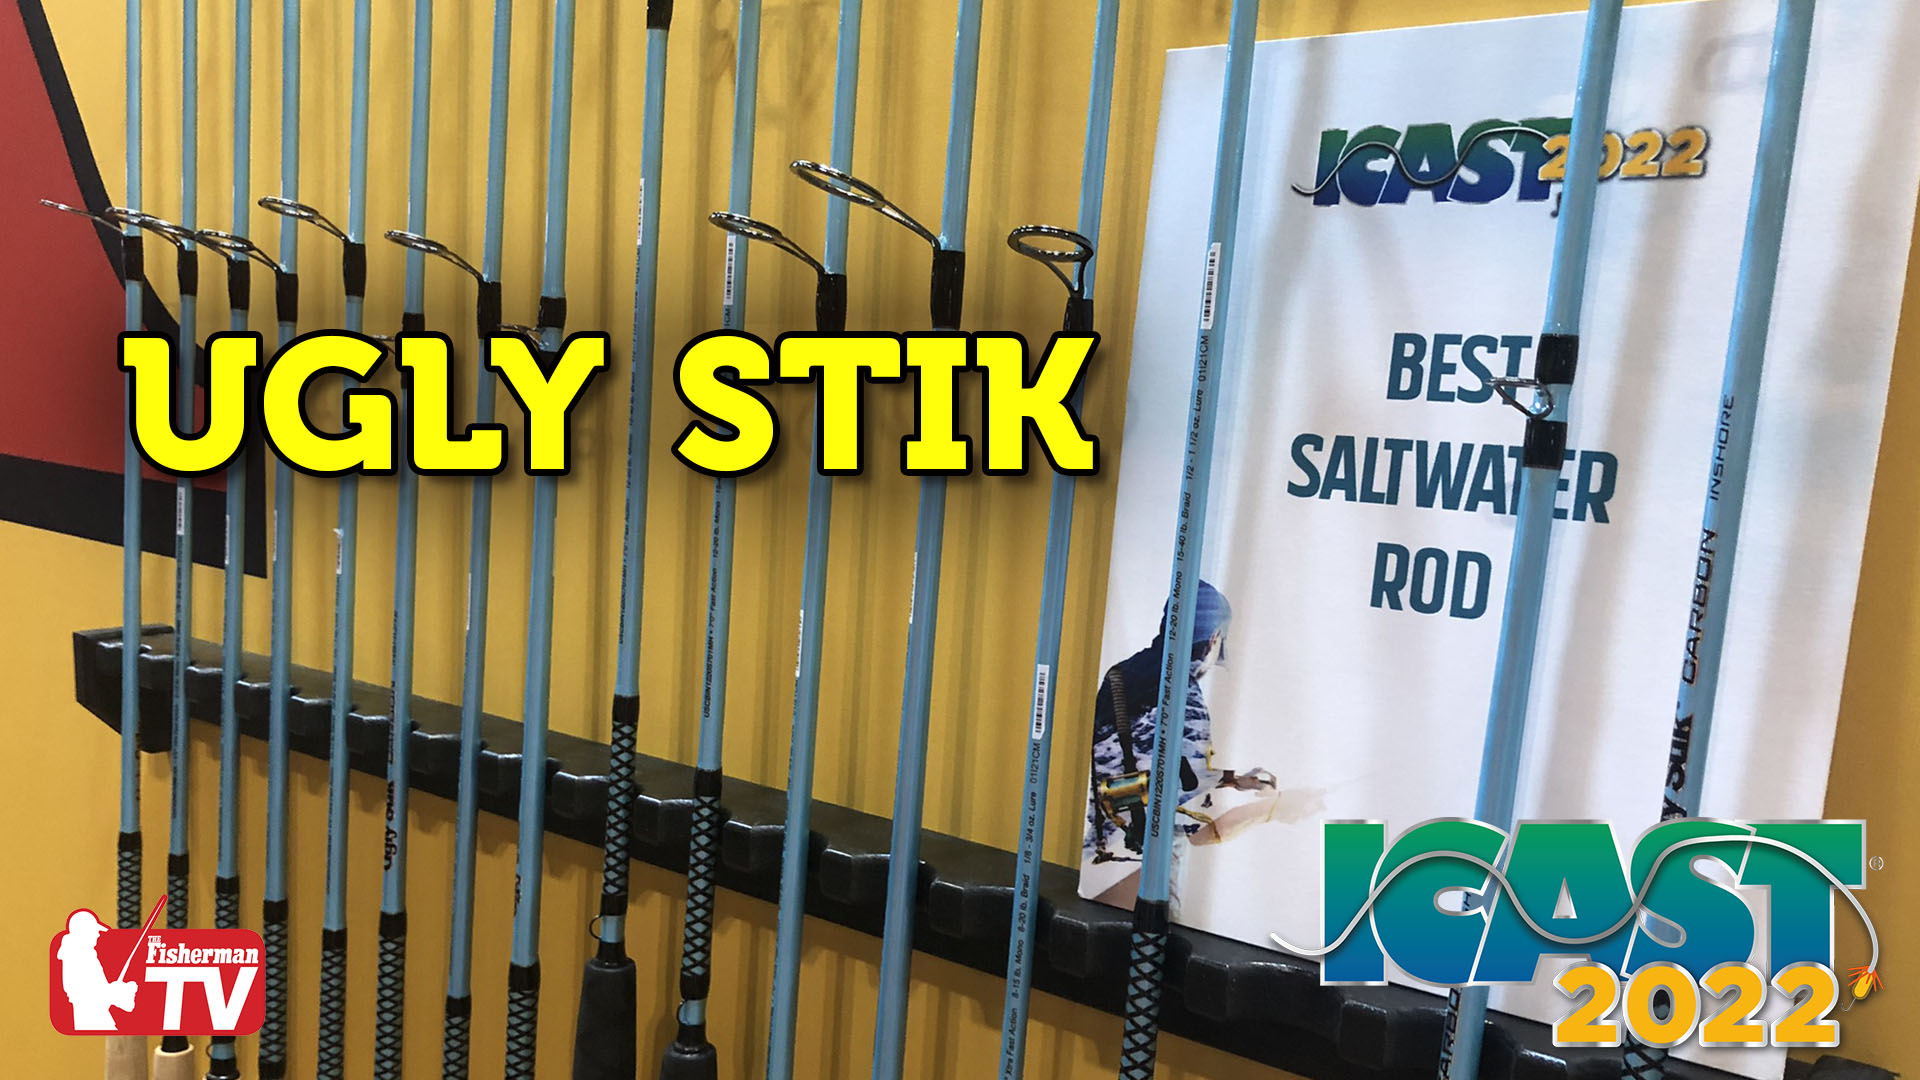 ICAST '22: The Fisherman's “New Product Spotlight” - Ugly Stik